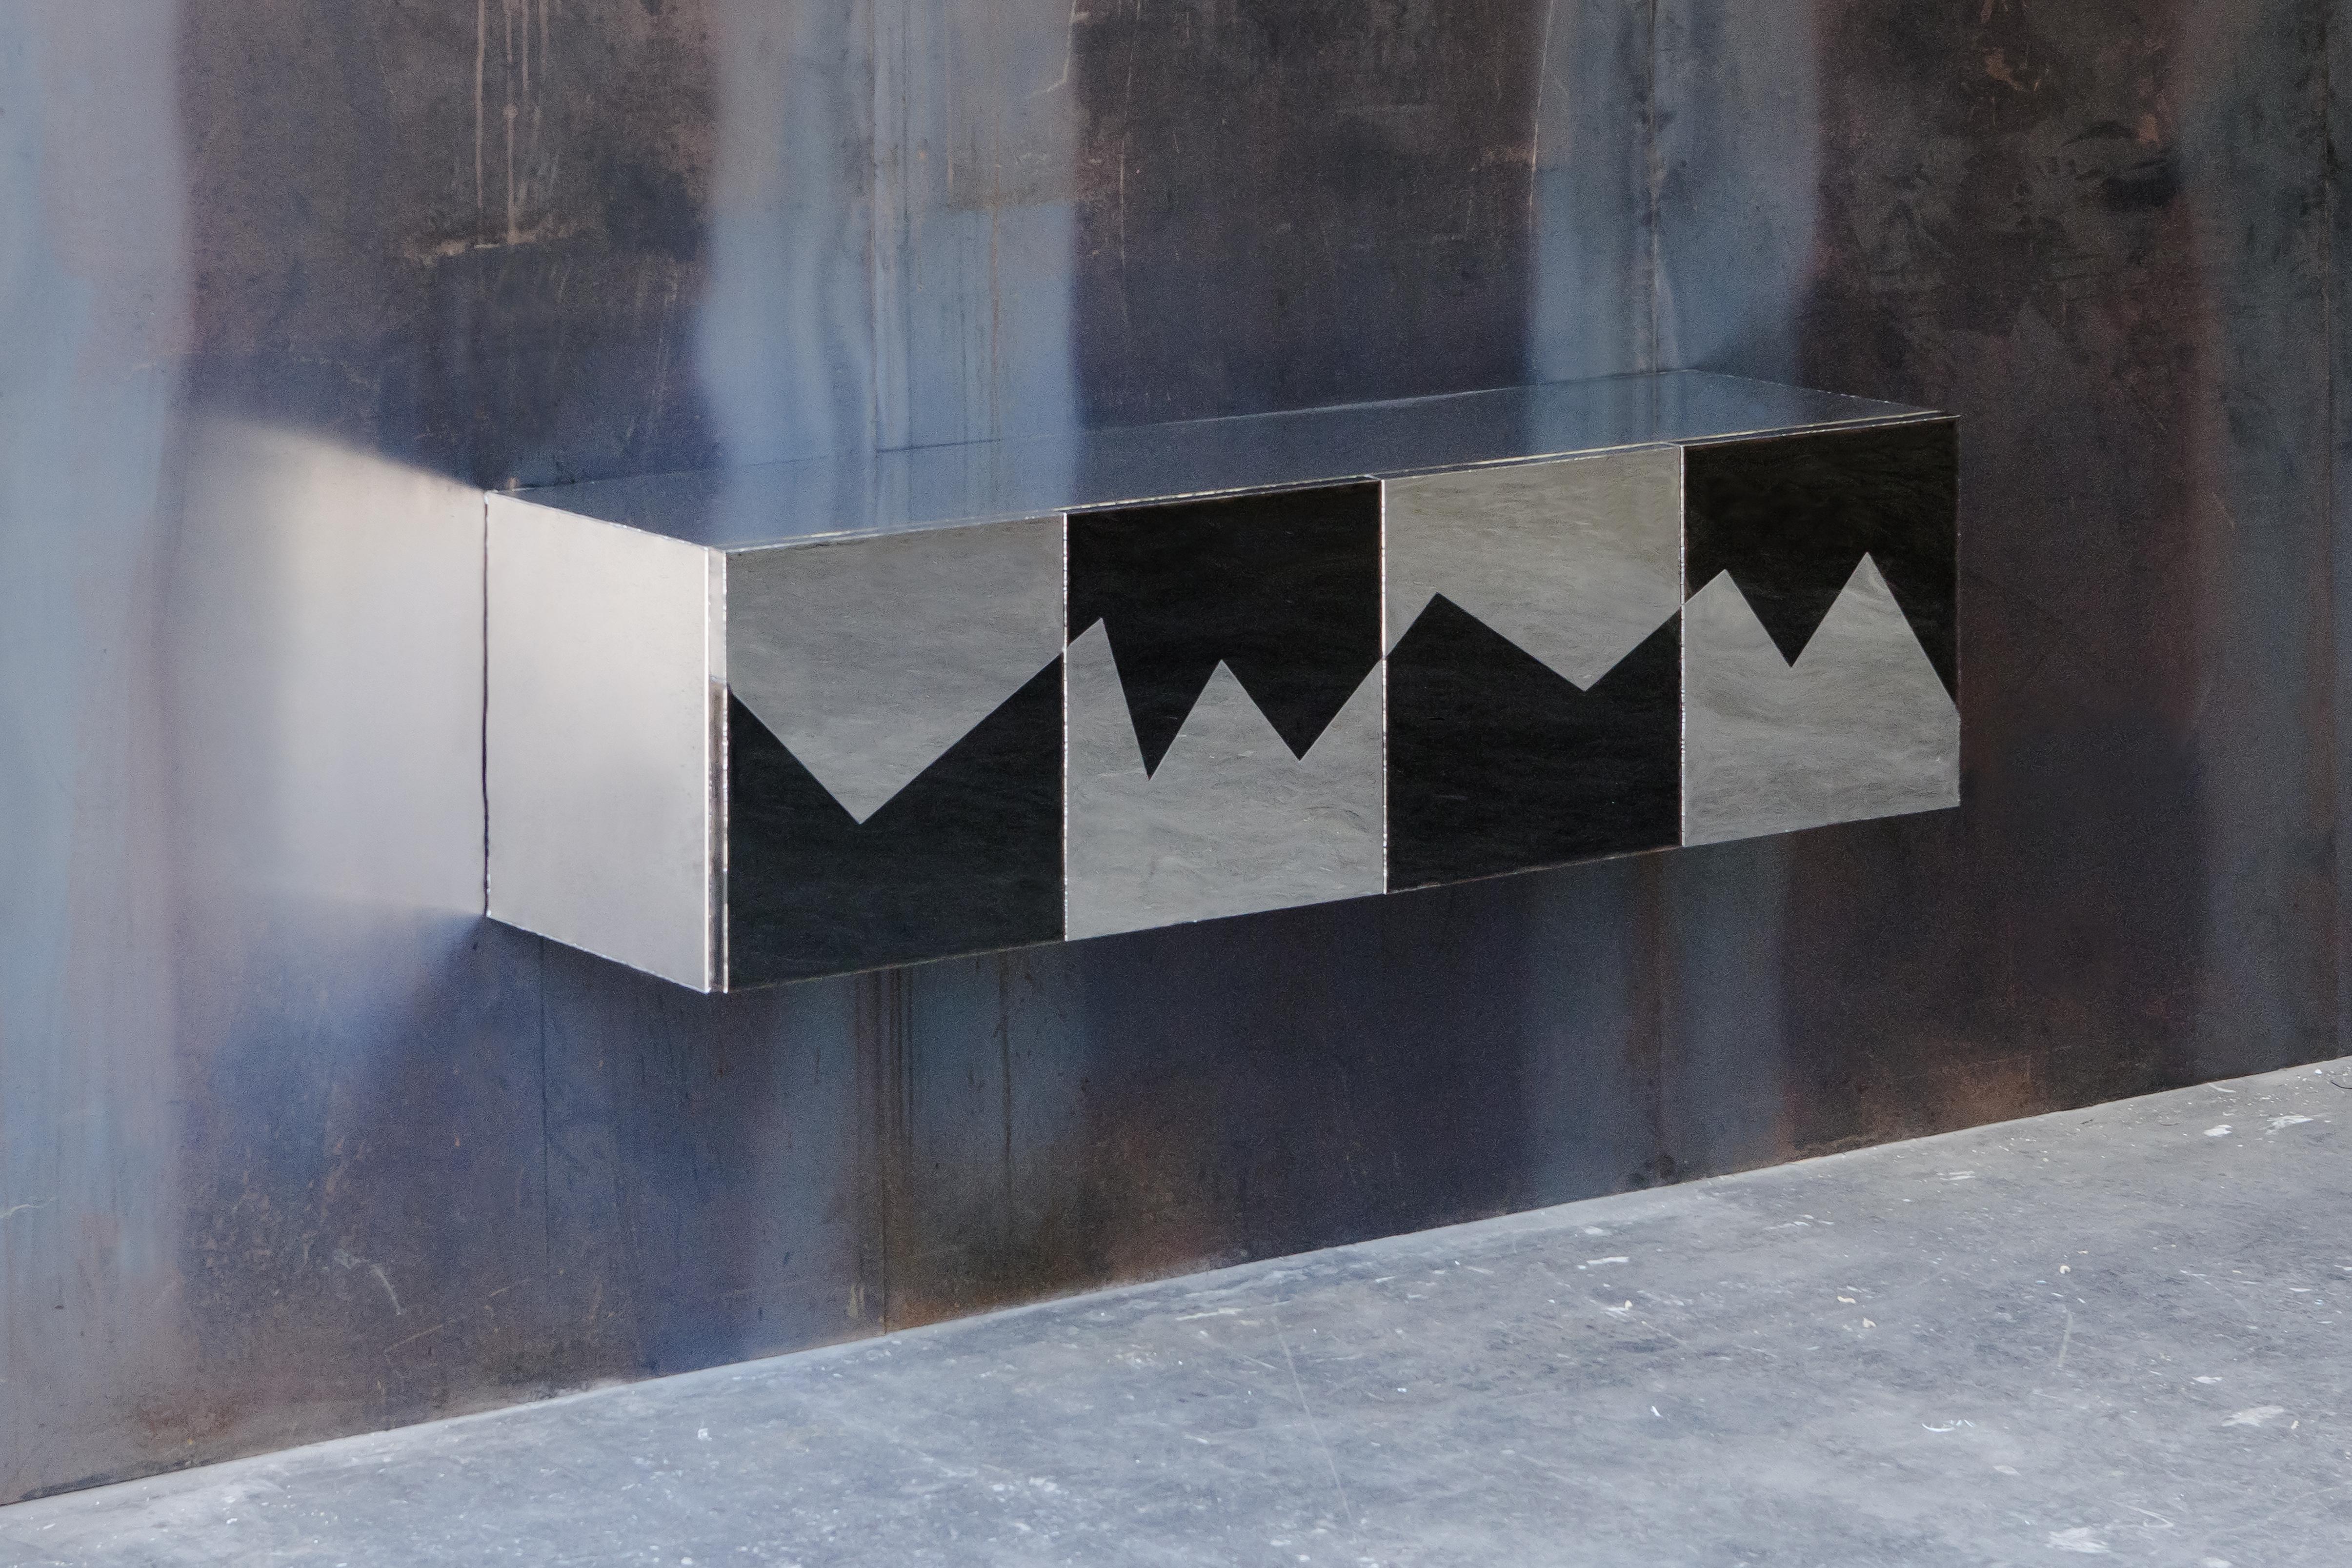 Hanging cabinet by Michael Gittings Studio
One of a kind
Dimensions: D 180 x W 40 x H 47 cm
Materials: Mirror polished stainless steel

Michael Gittings
Melbourne based designer Michael Gittings aims to
Challenge pre-conceptions around